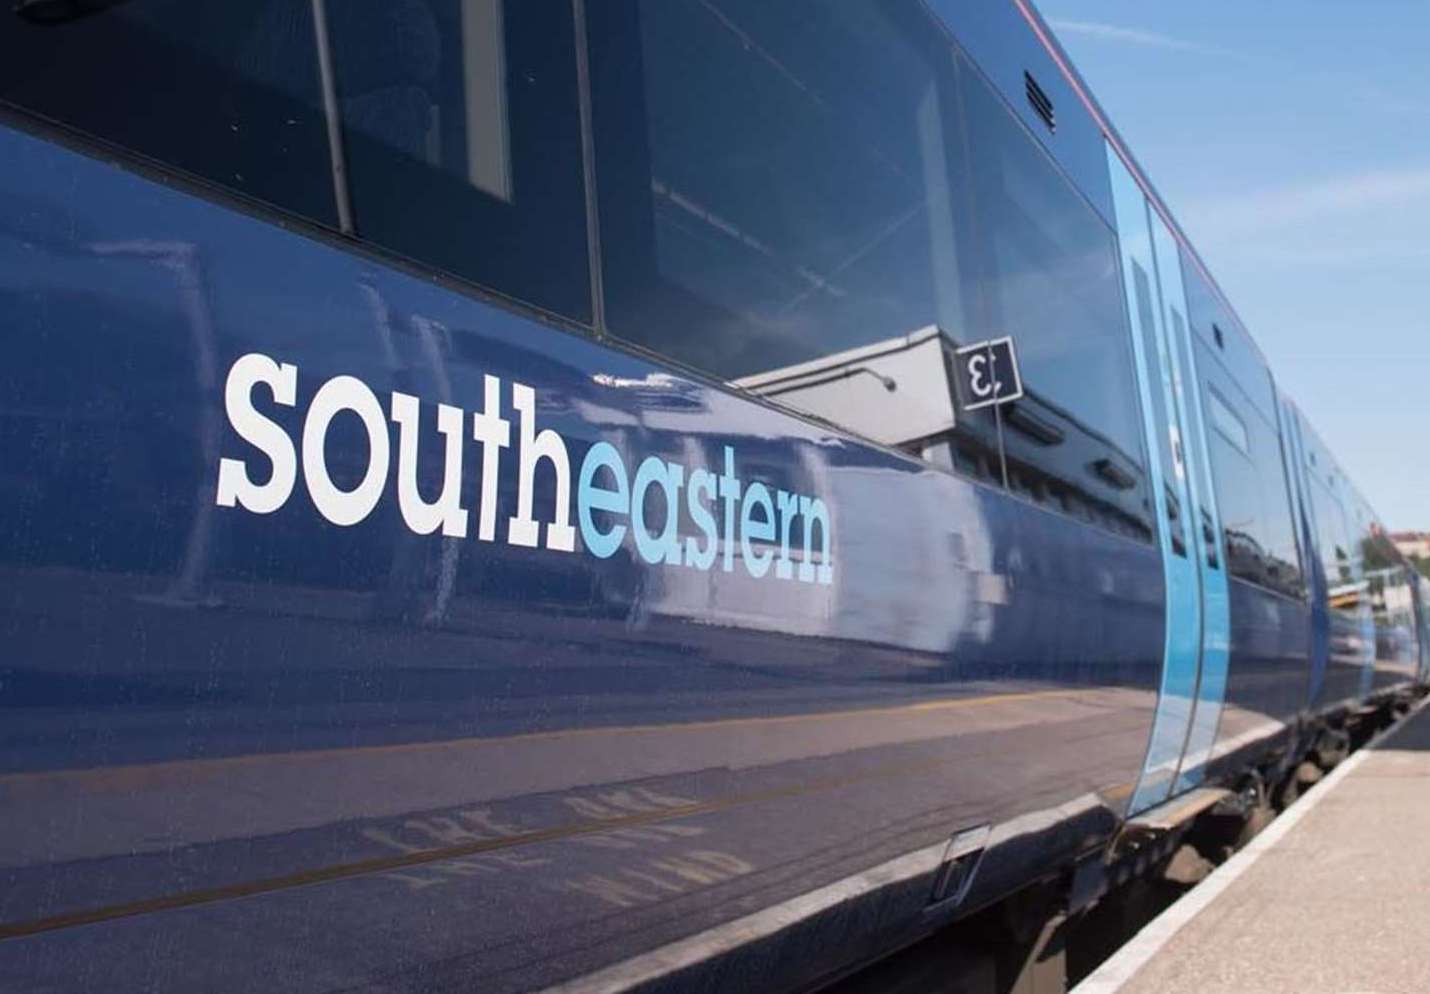 Southeastern says there will be no service on Friday